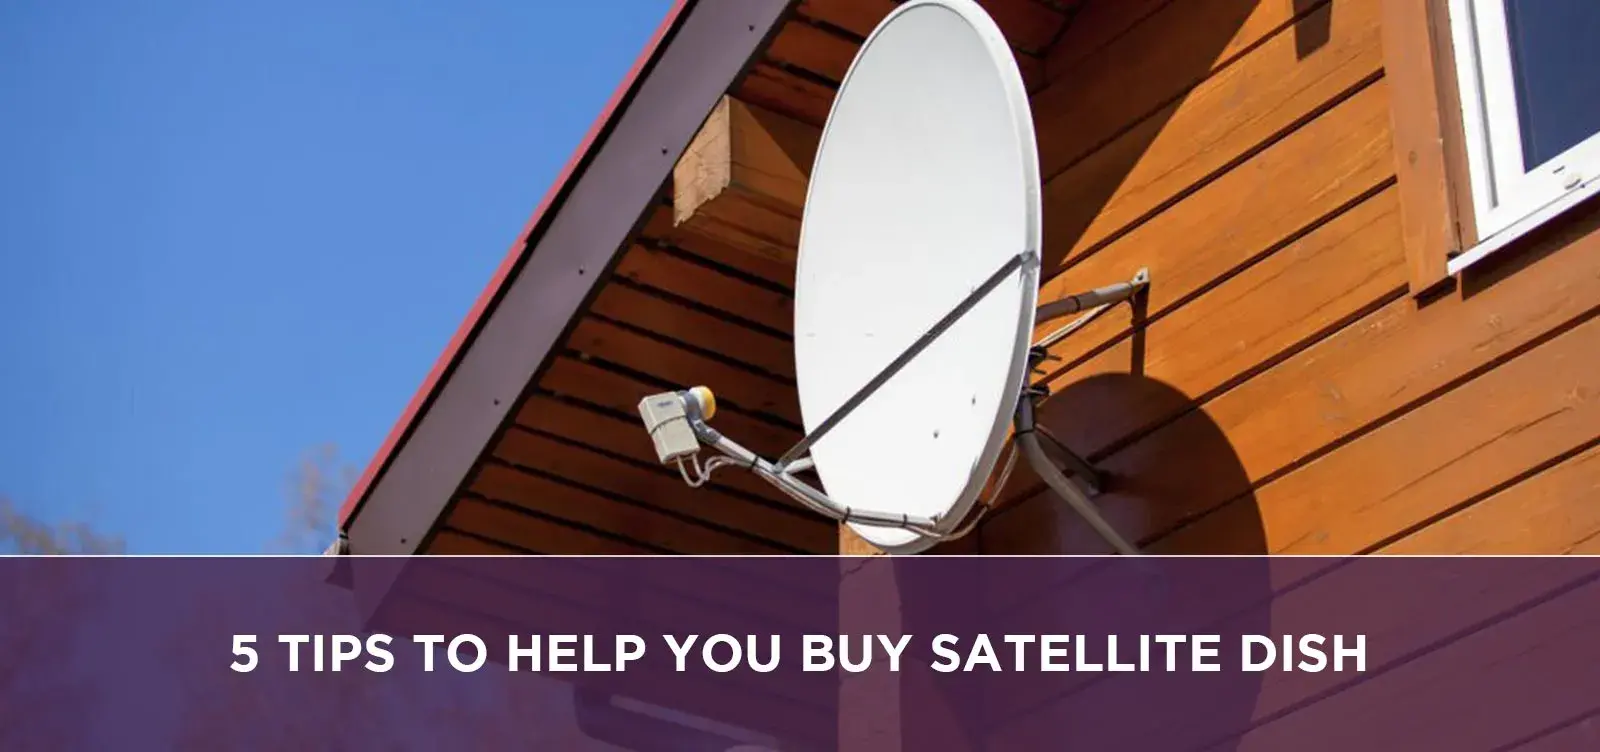 5 Tips to Help You Buy Satellite Dish